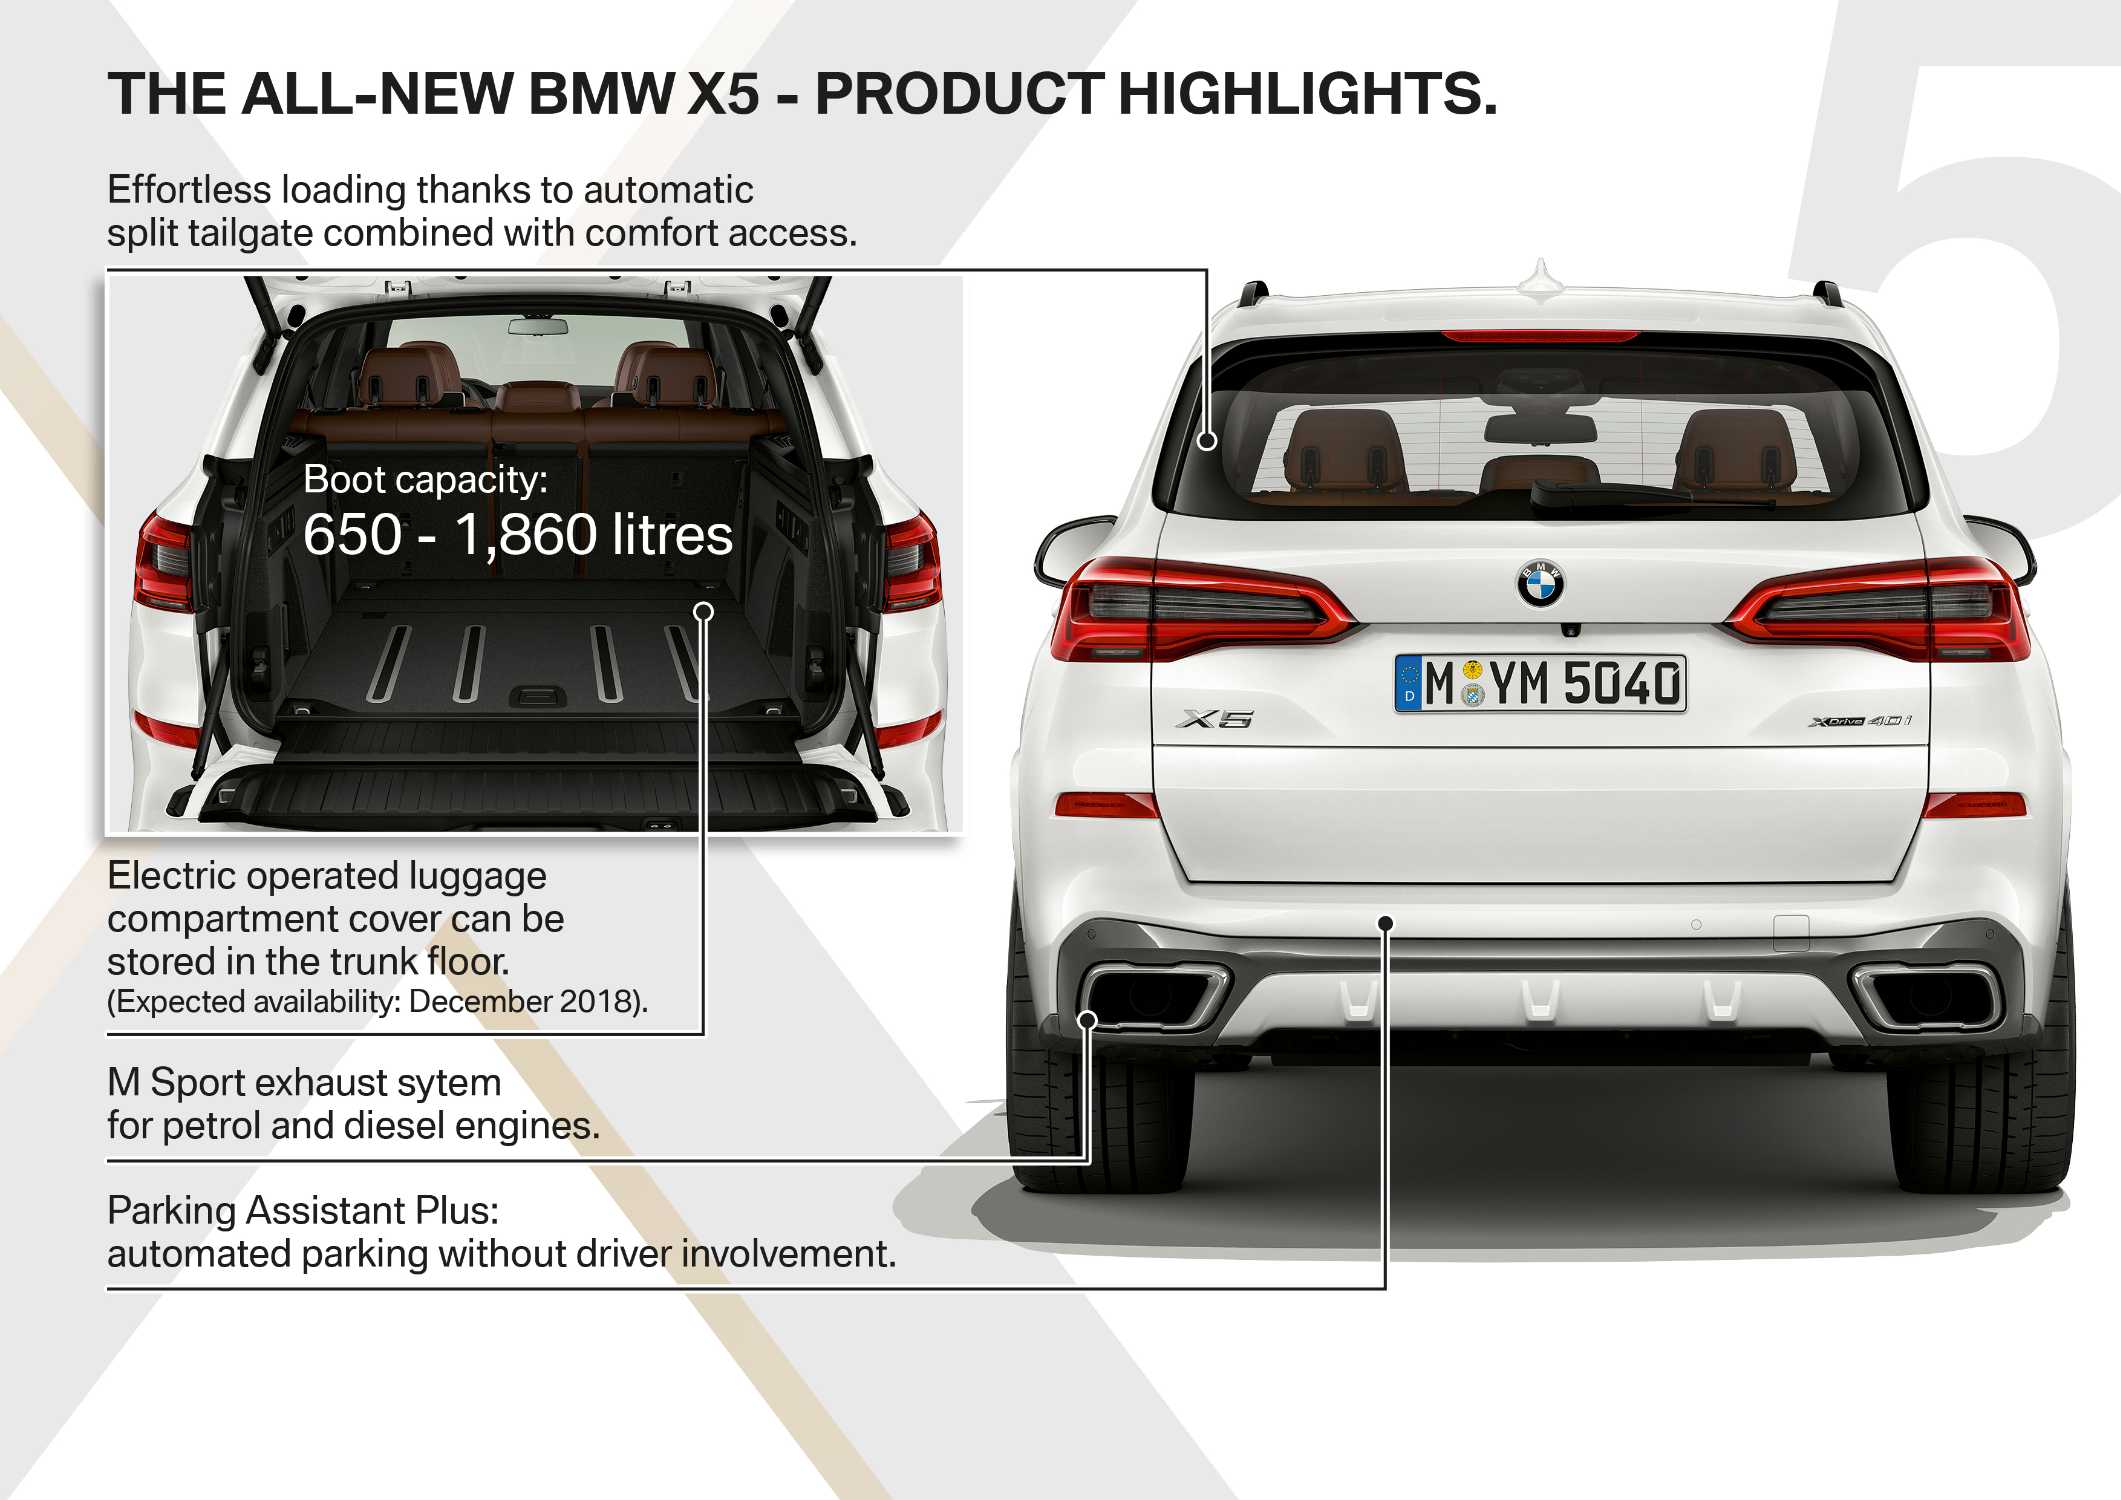 The all-new BMW X5 - Product Highlights (06/2018).